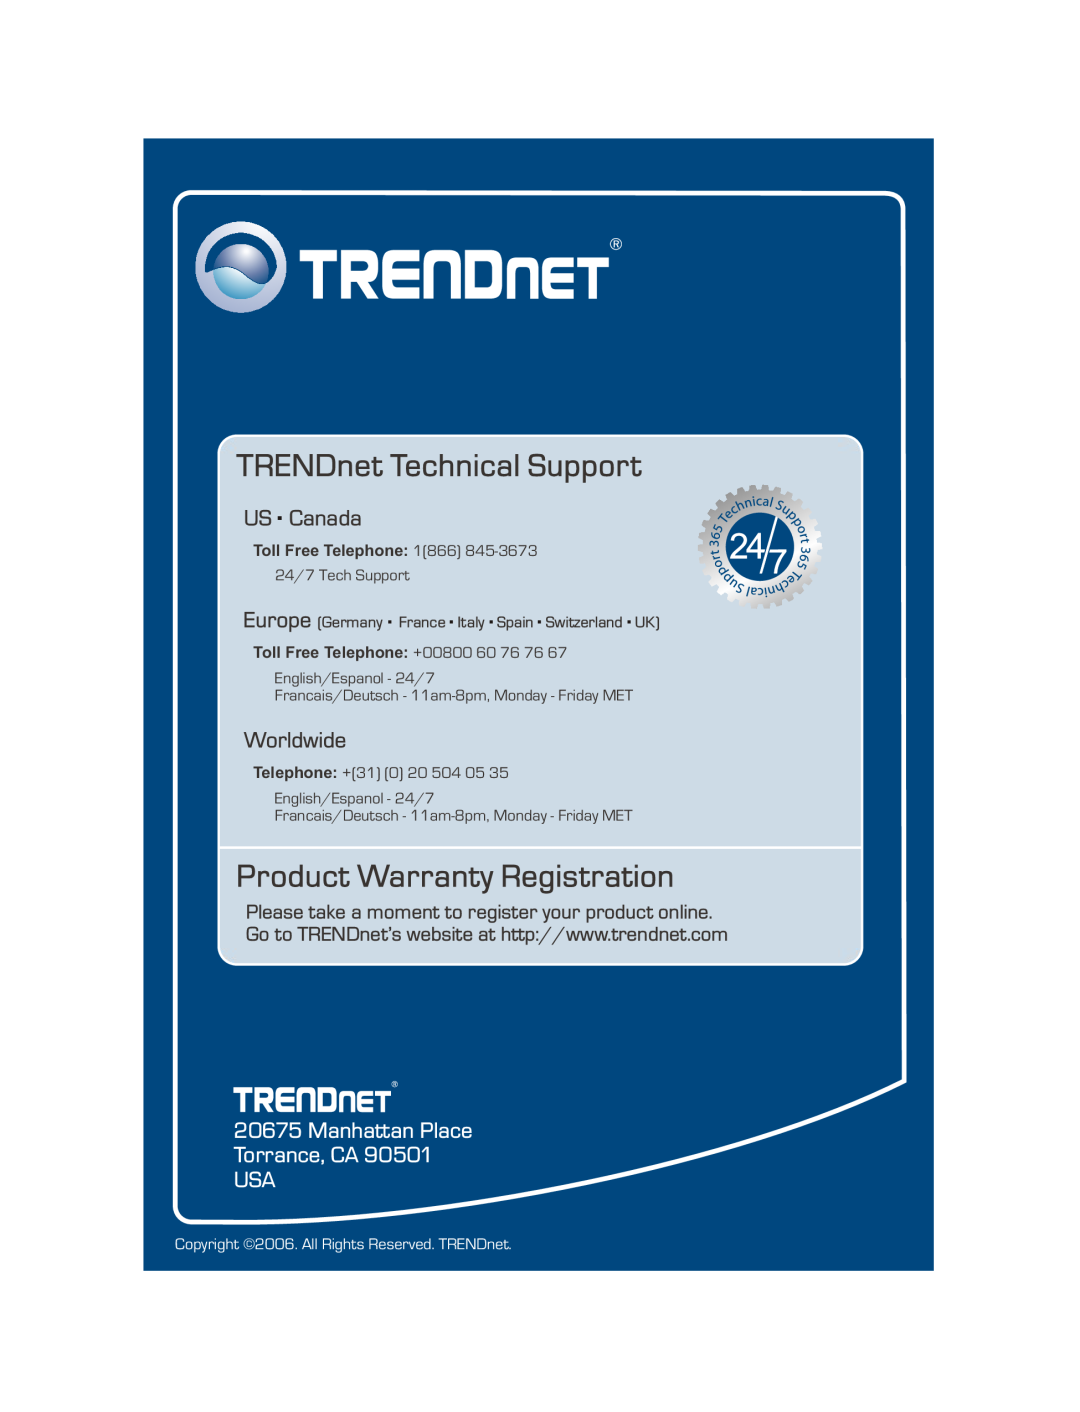 TRENDnet 100Base-FX TRENDnet Technical Support, Product Warranty Registration, US . Canada, Worldwide, Toll Free Telephone 